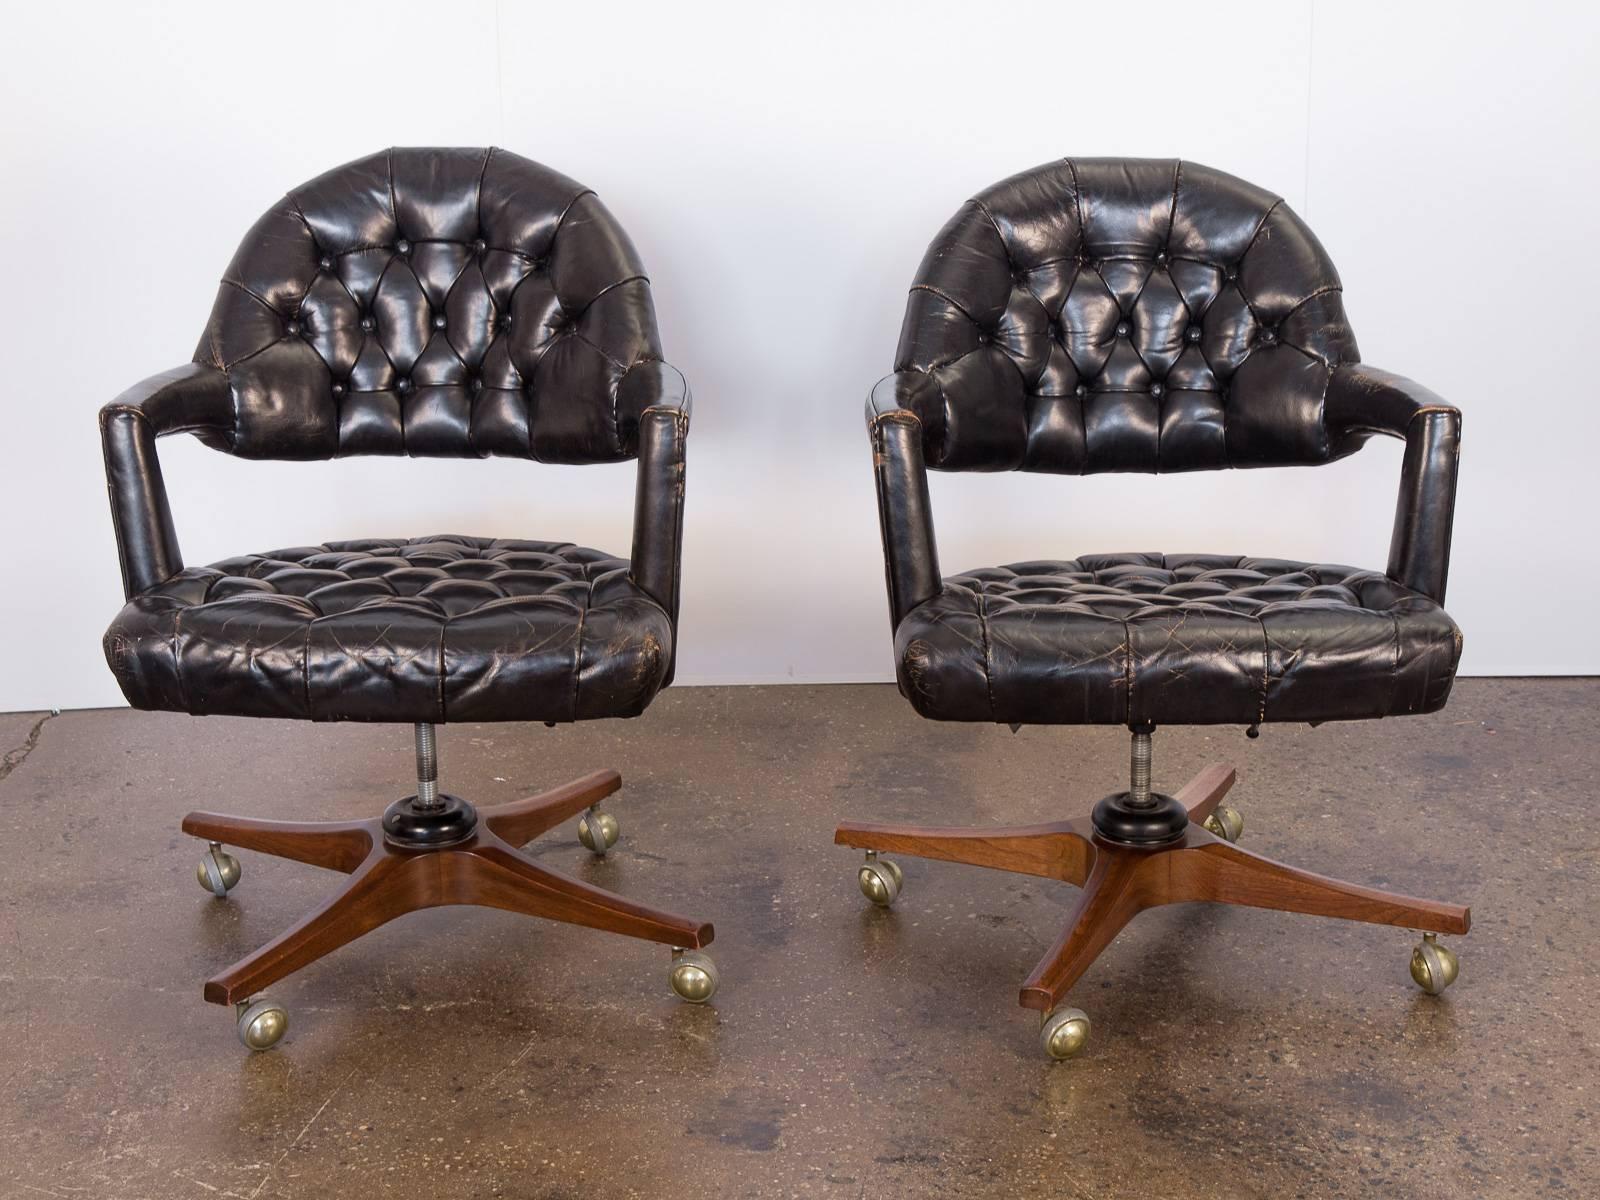 1950s open-back, tufted leather swivel chairs by Edward Wormley for Dunbar. These stylishly worn desk chairs feature an open-back form with angular, padded armrests. The tufted black leather is supple and sumptuous with a gorgeous patina. Adjustable